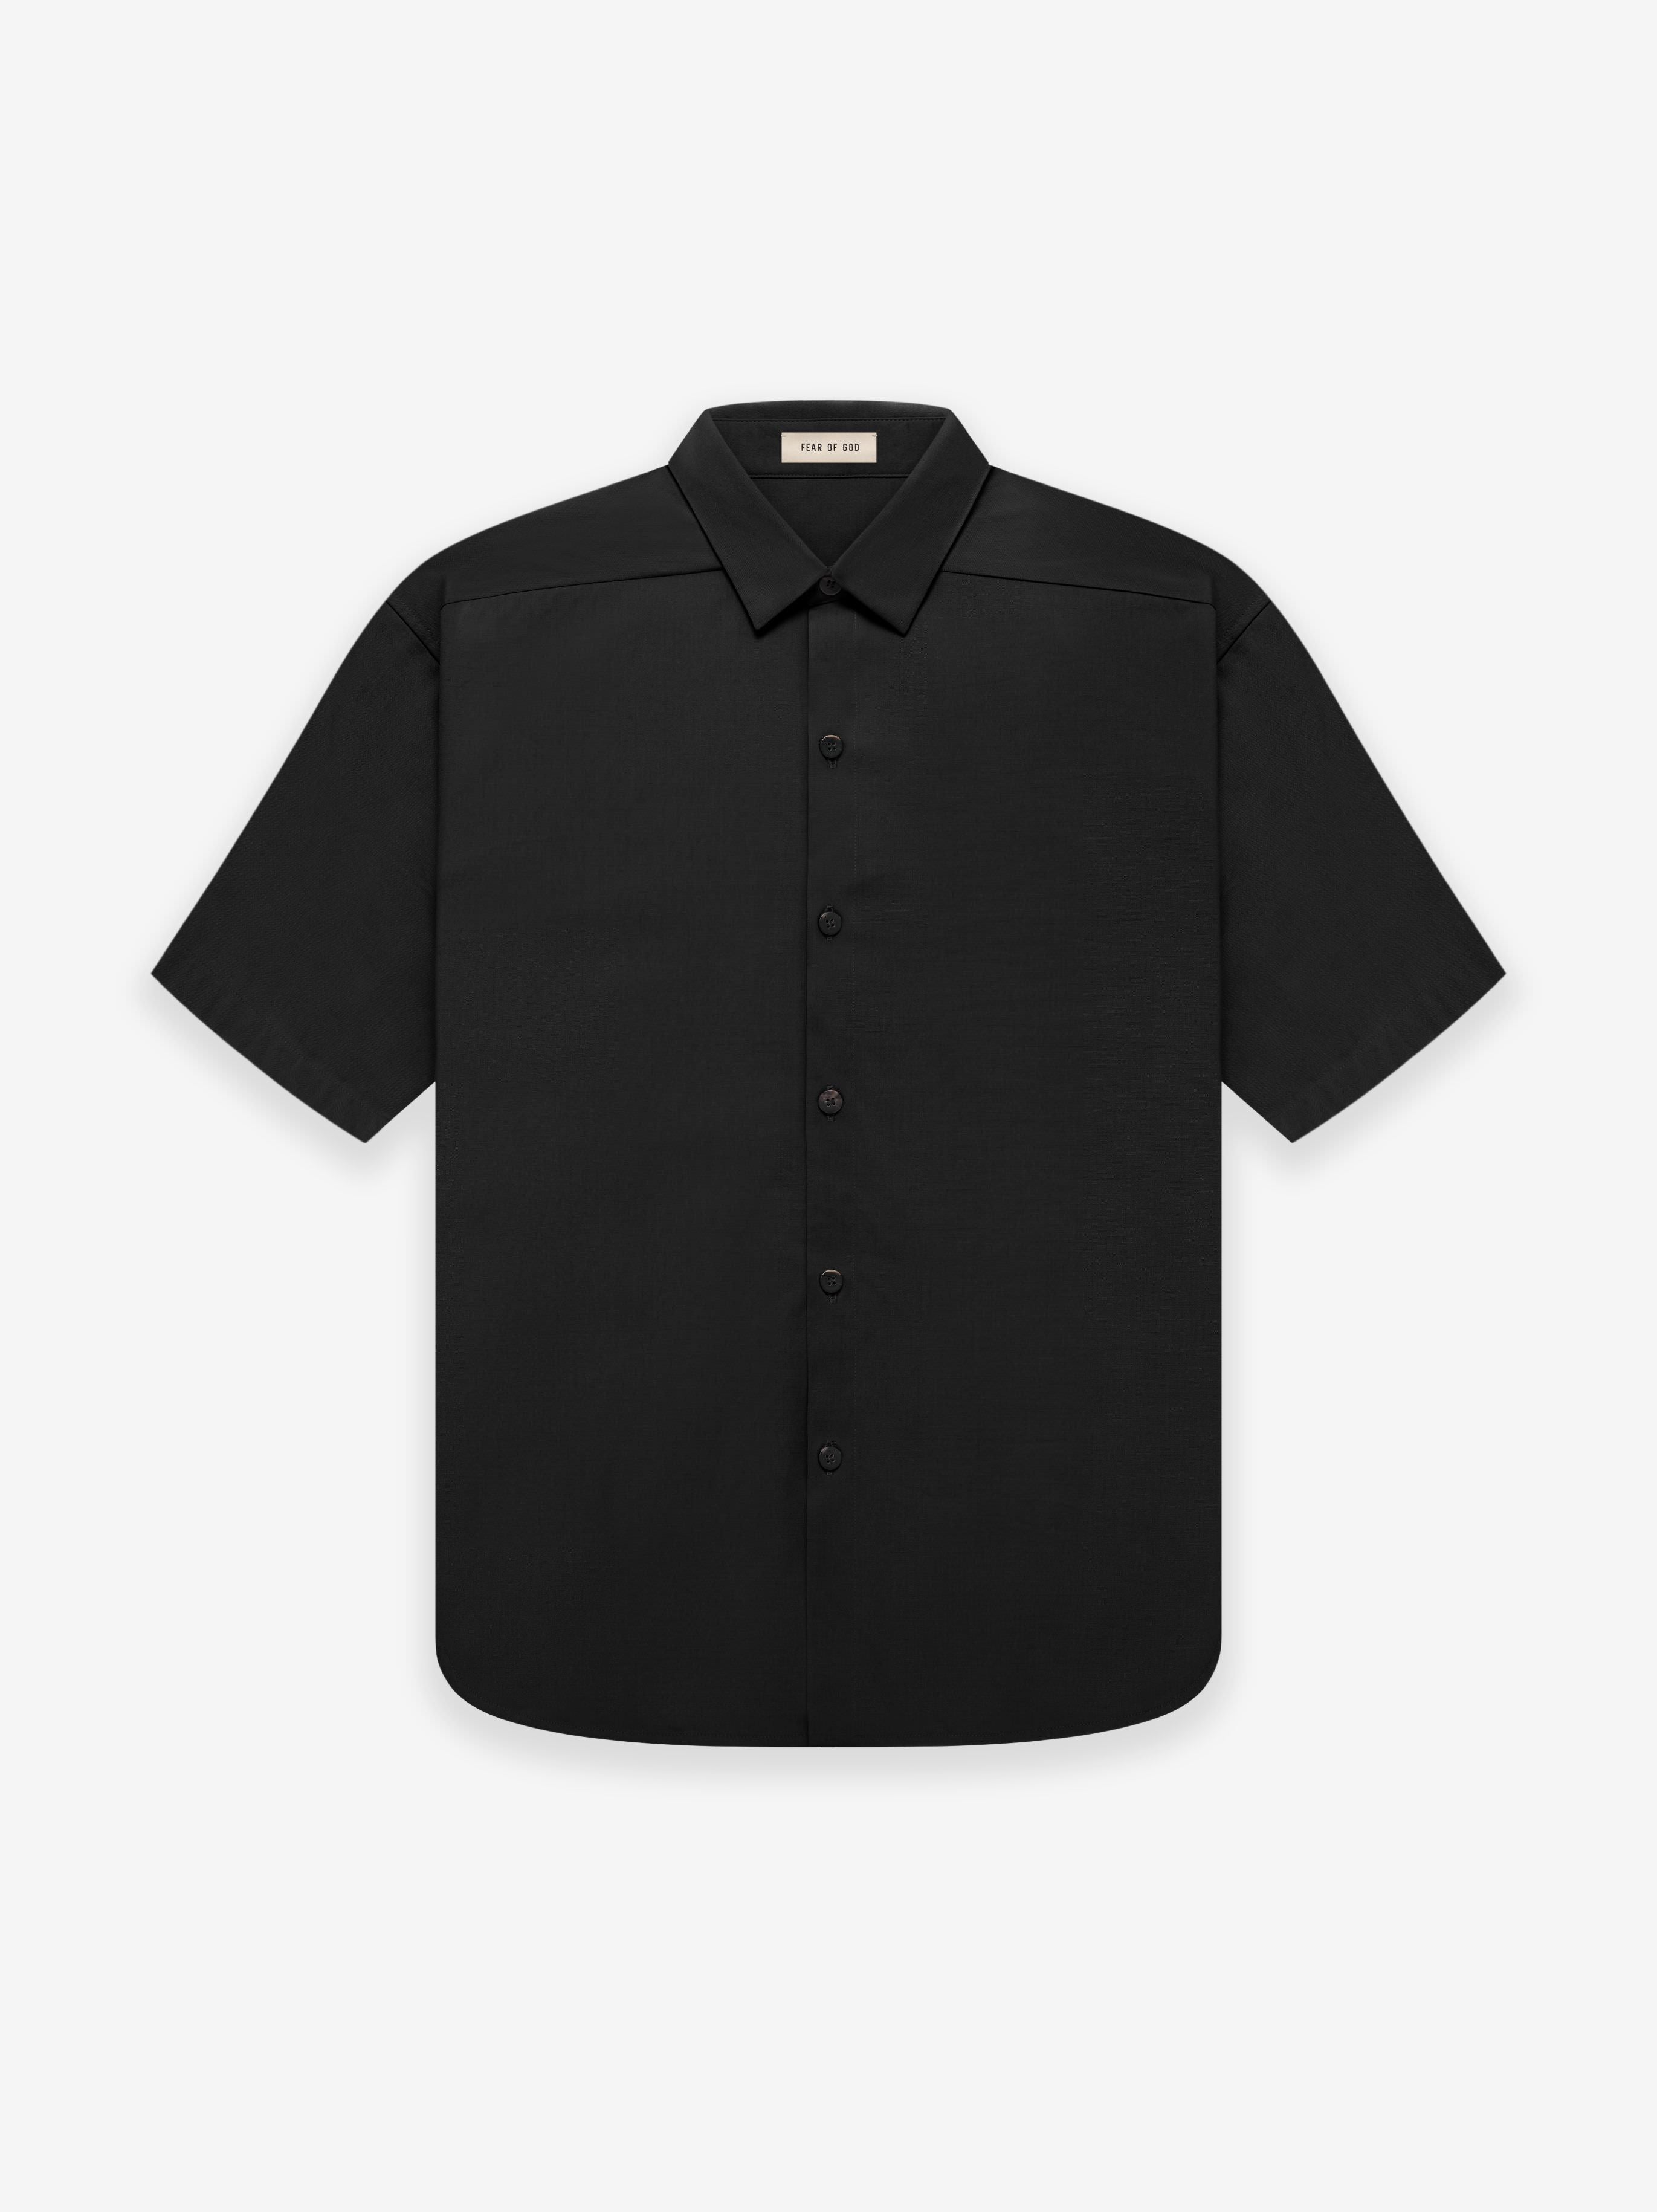 Fear of God Eternal Ss Button Front Shirt in Black | Fear of God